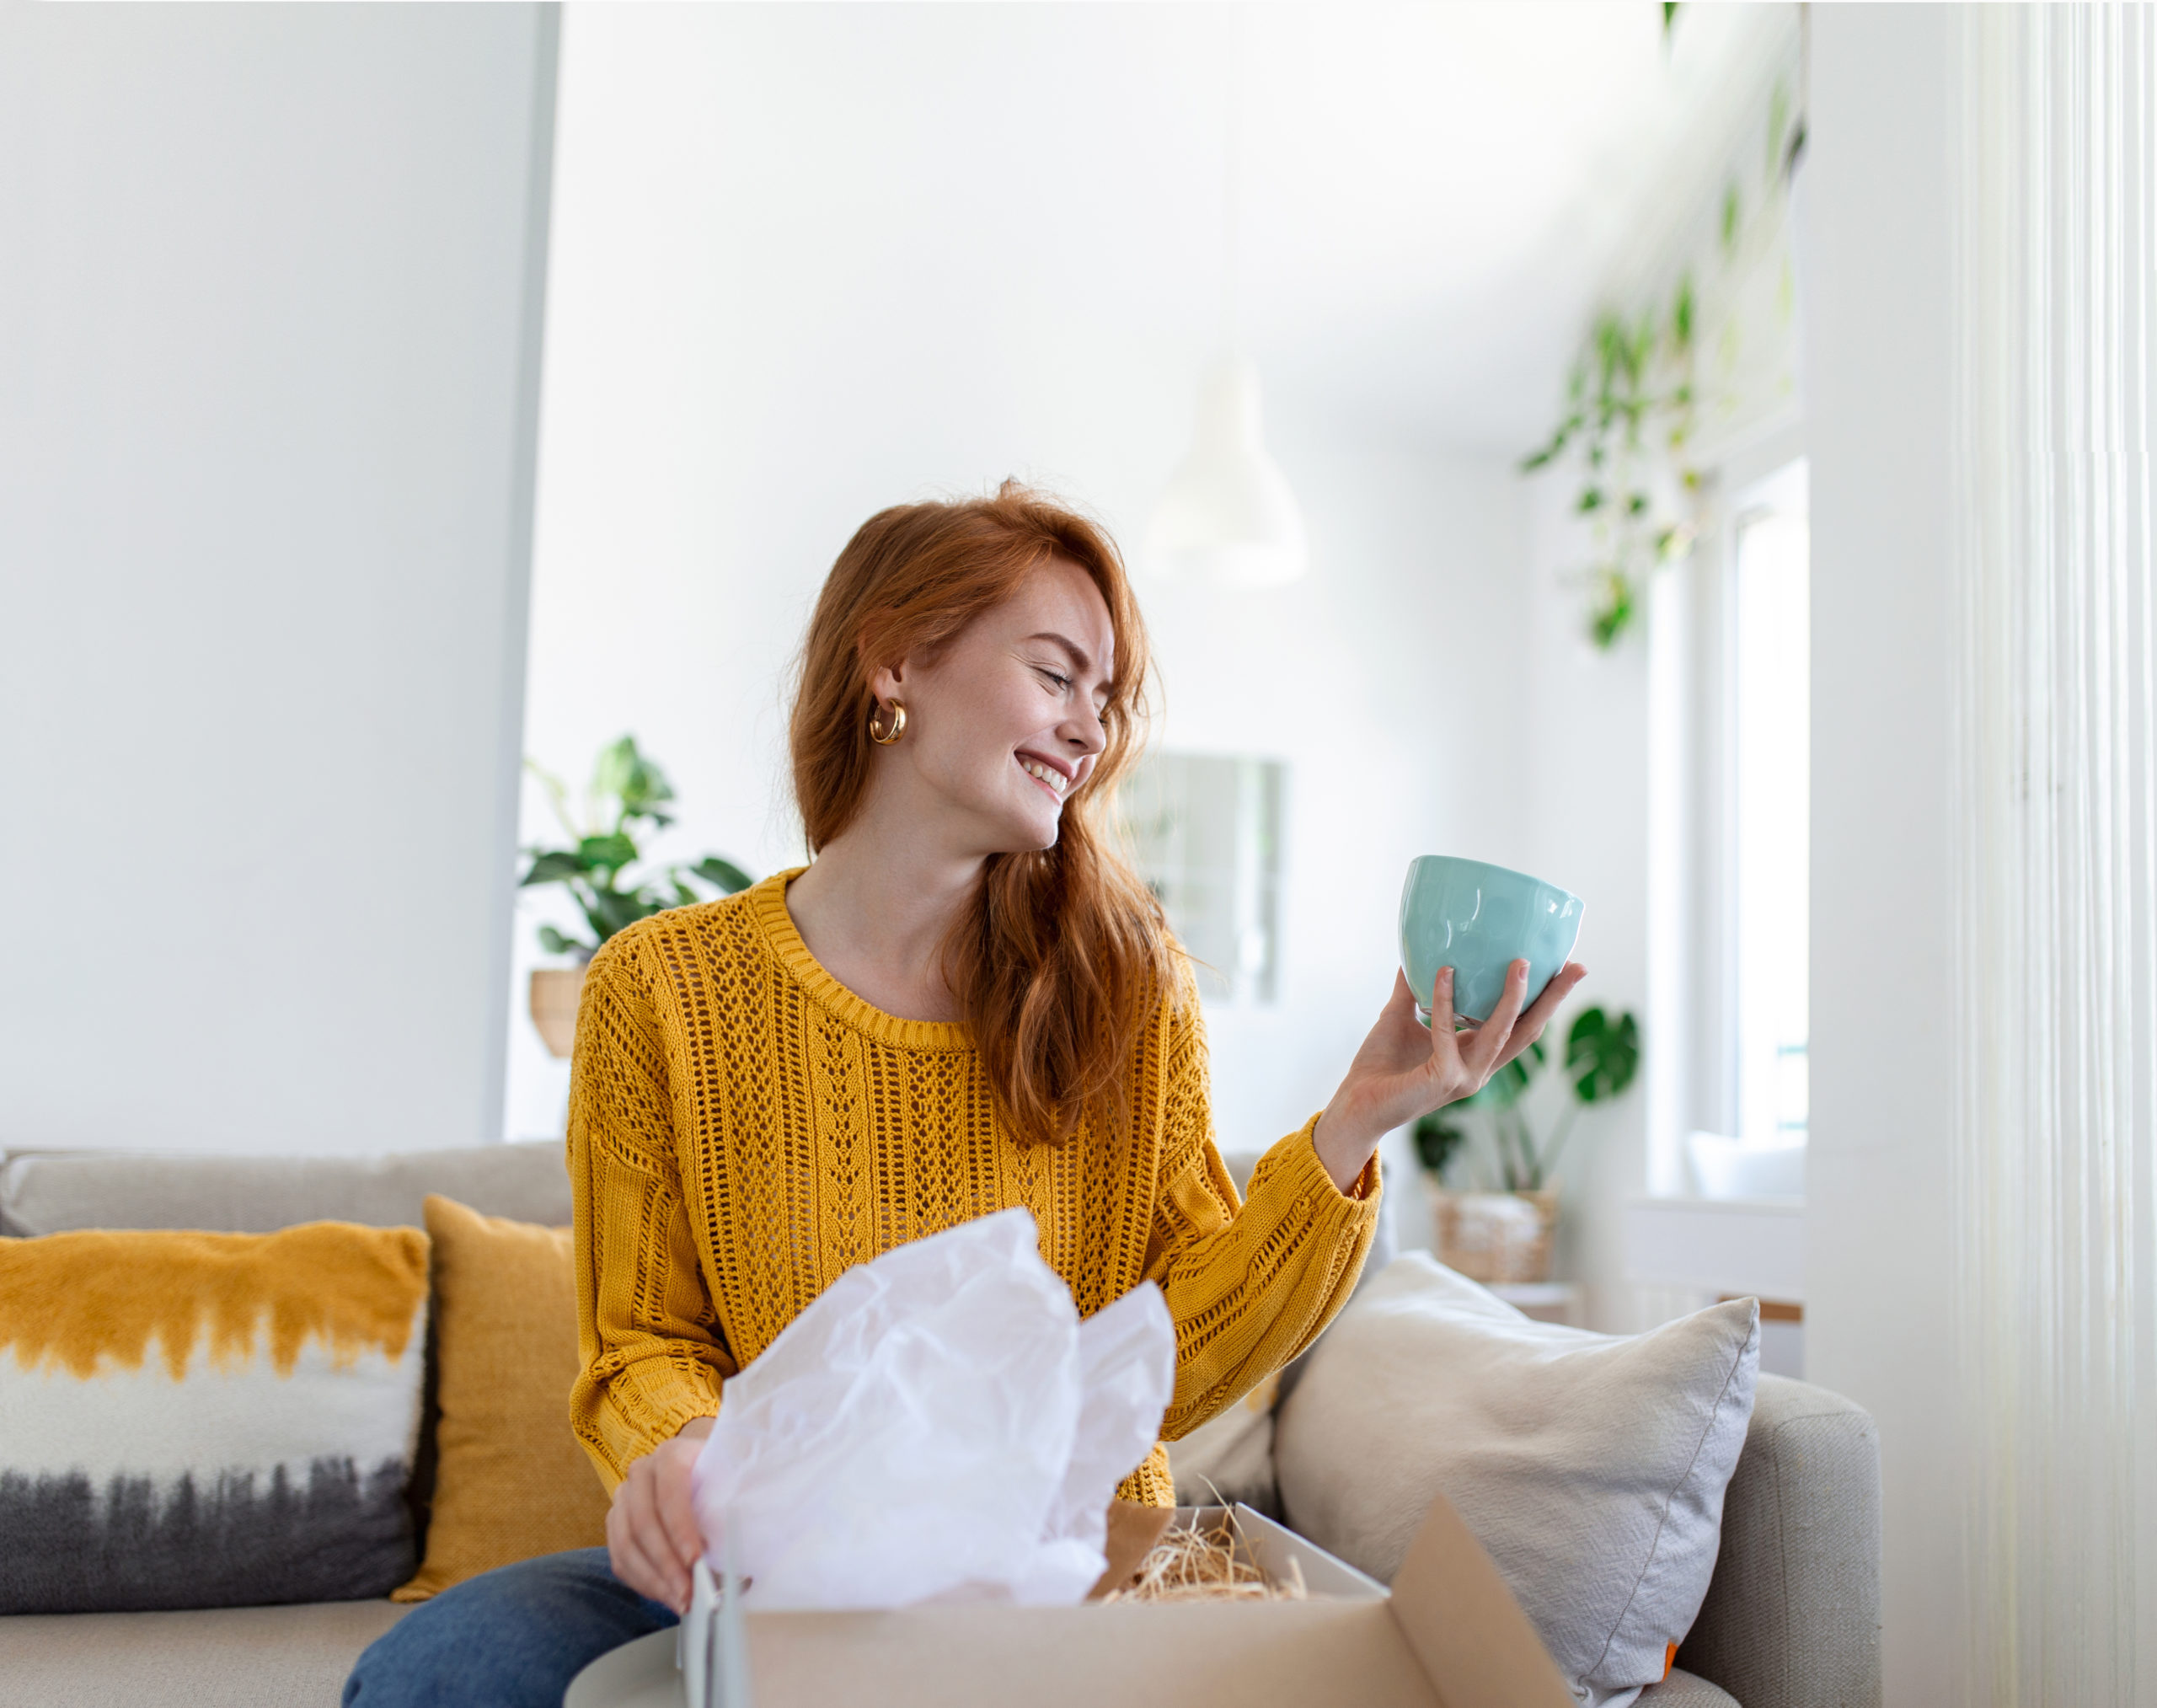 Female consumer unpack parcel receive retail purchase fast postal shipping delivery concept. Beautiful young woman is holding cardboard box sitting on sofa at home.